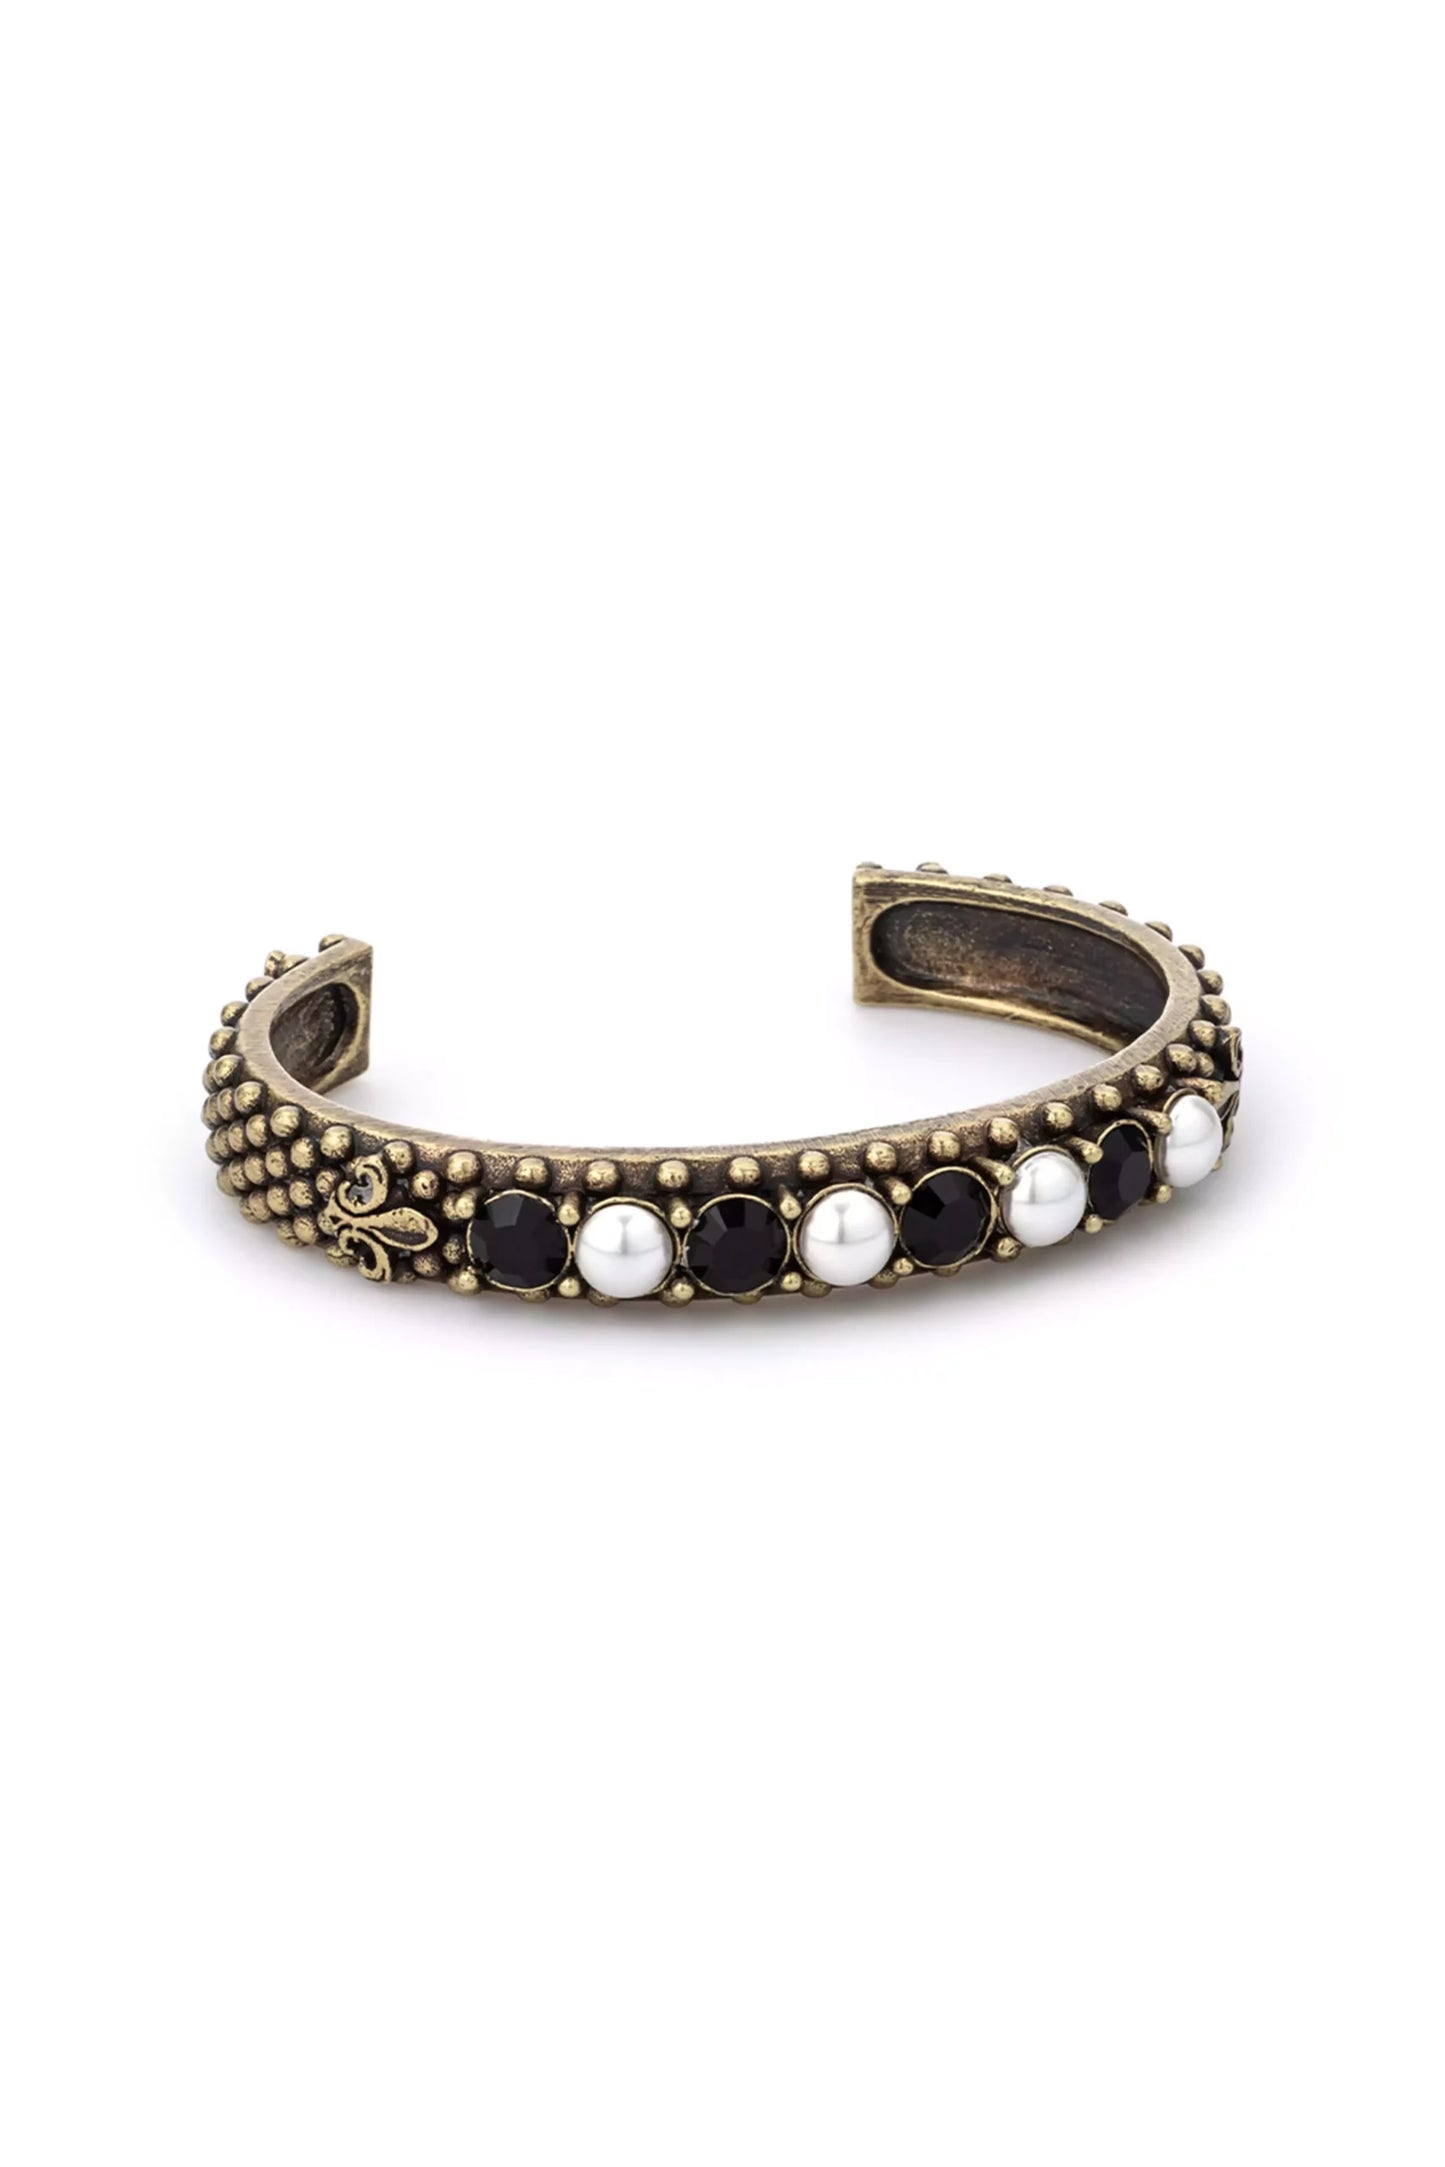 The Brass and Pearl + Jet Black Crystal Cuff